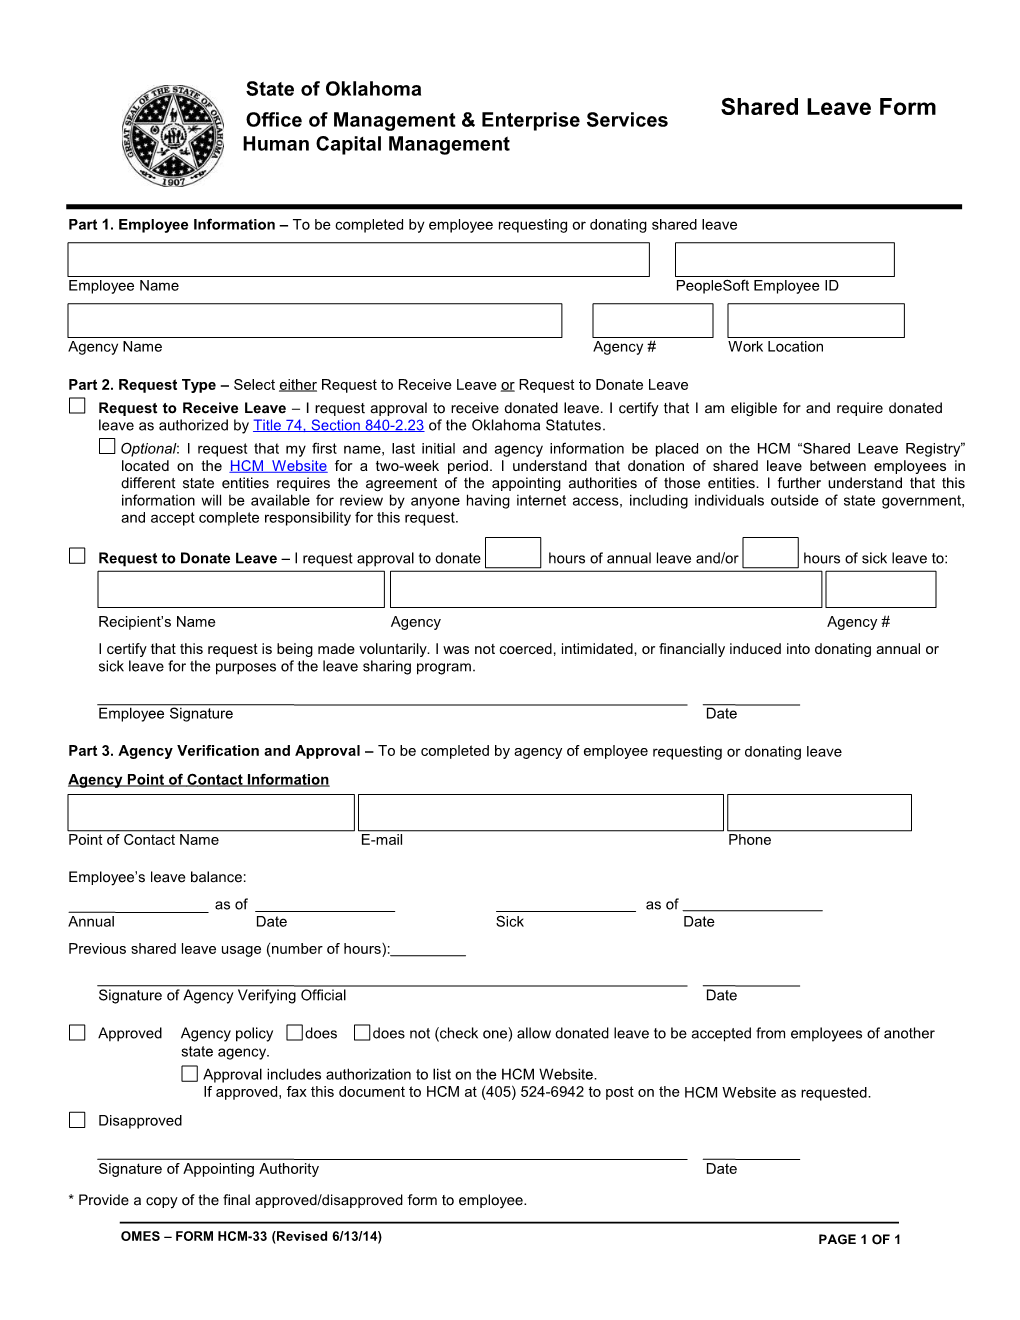 Shared Leave Form